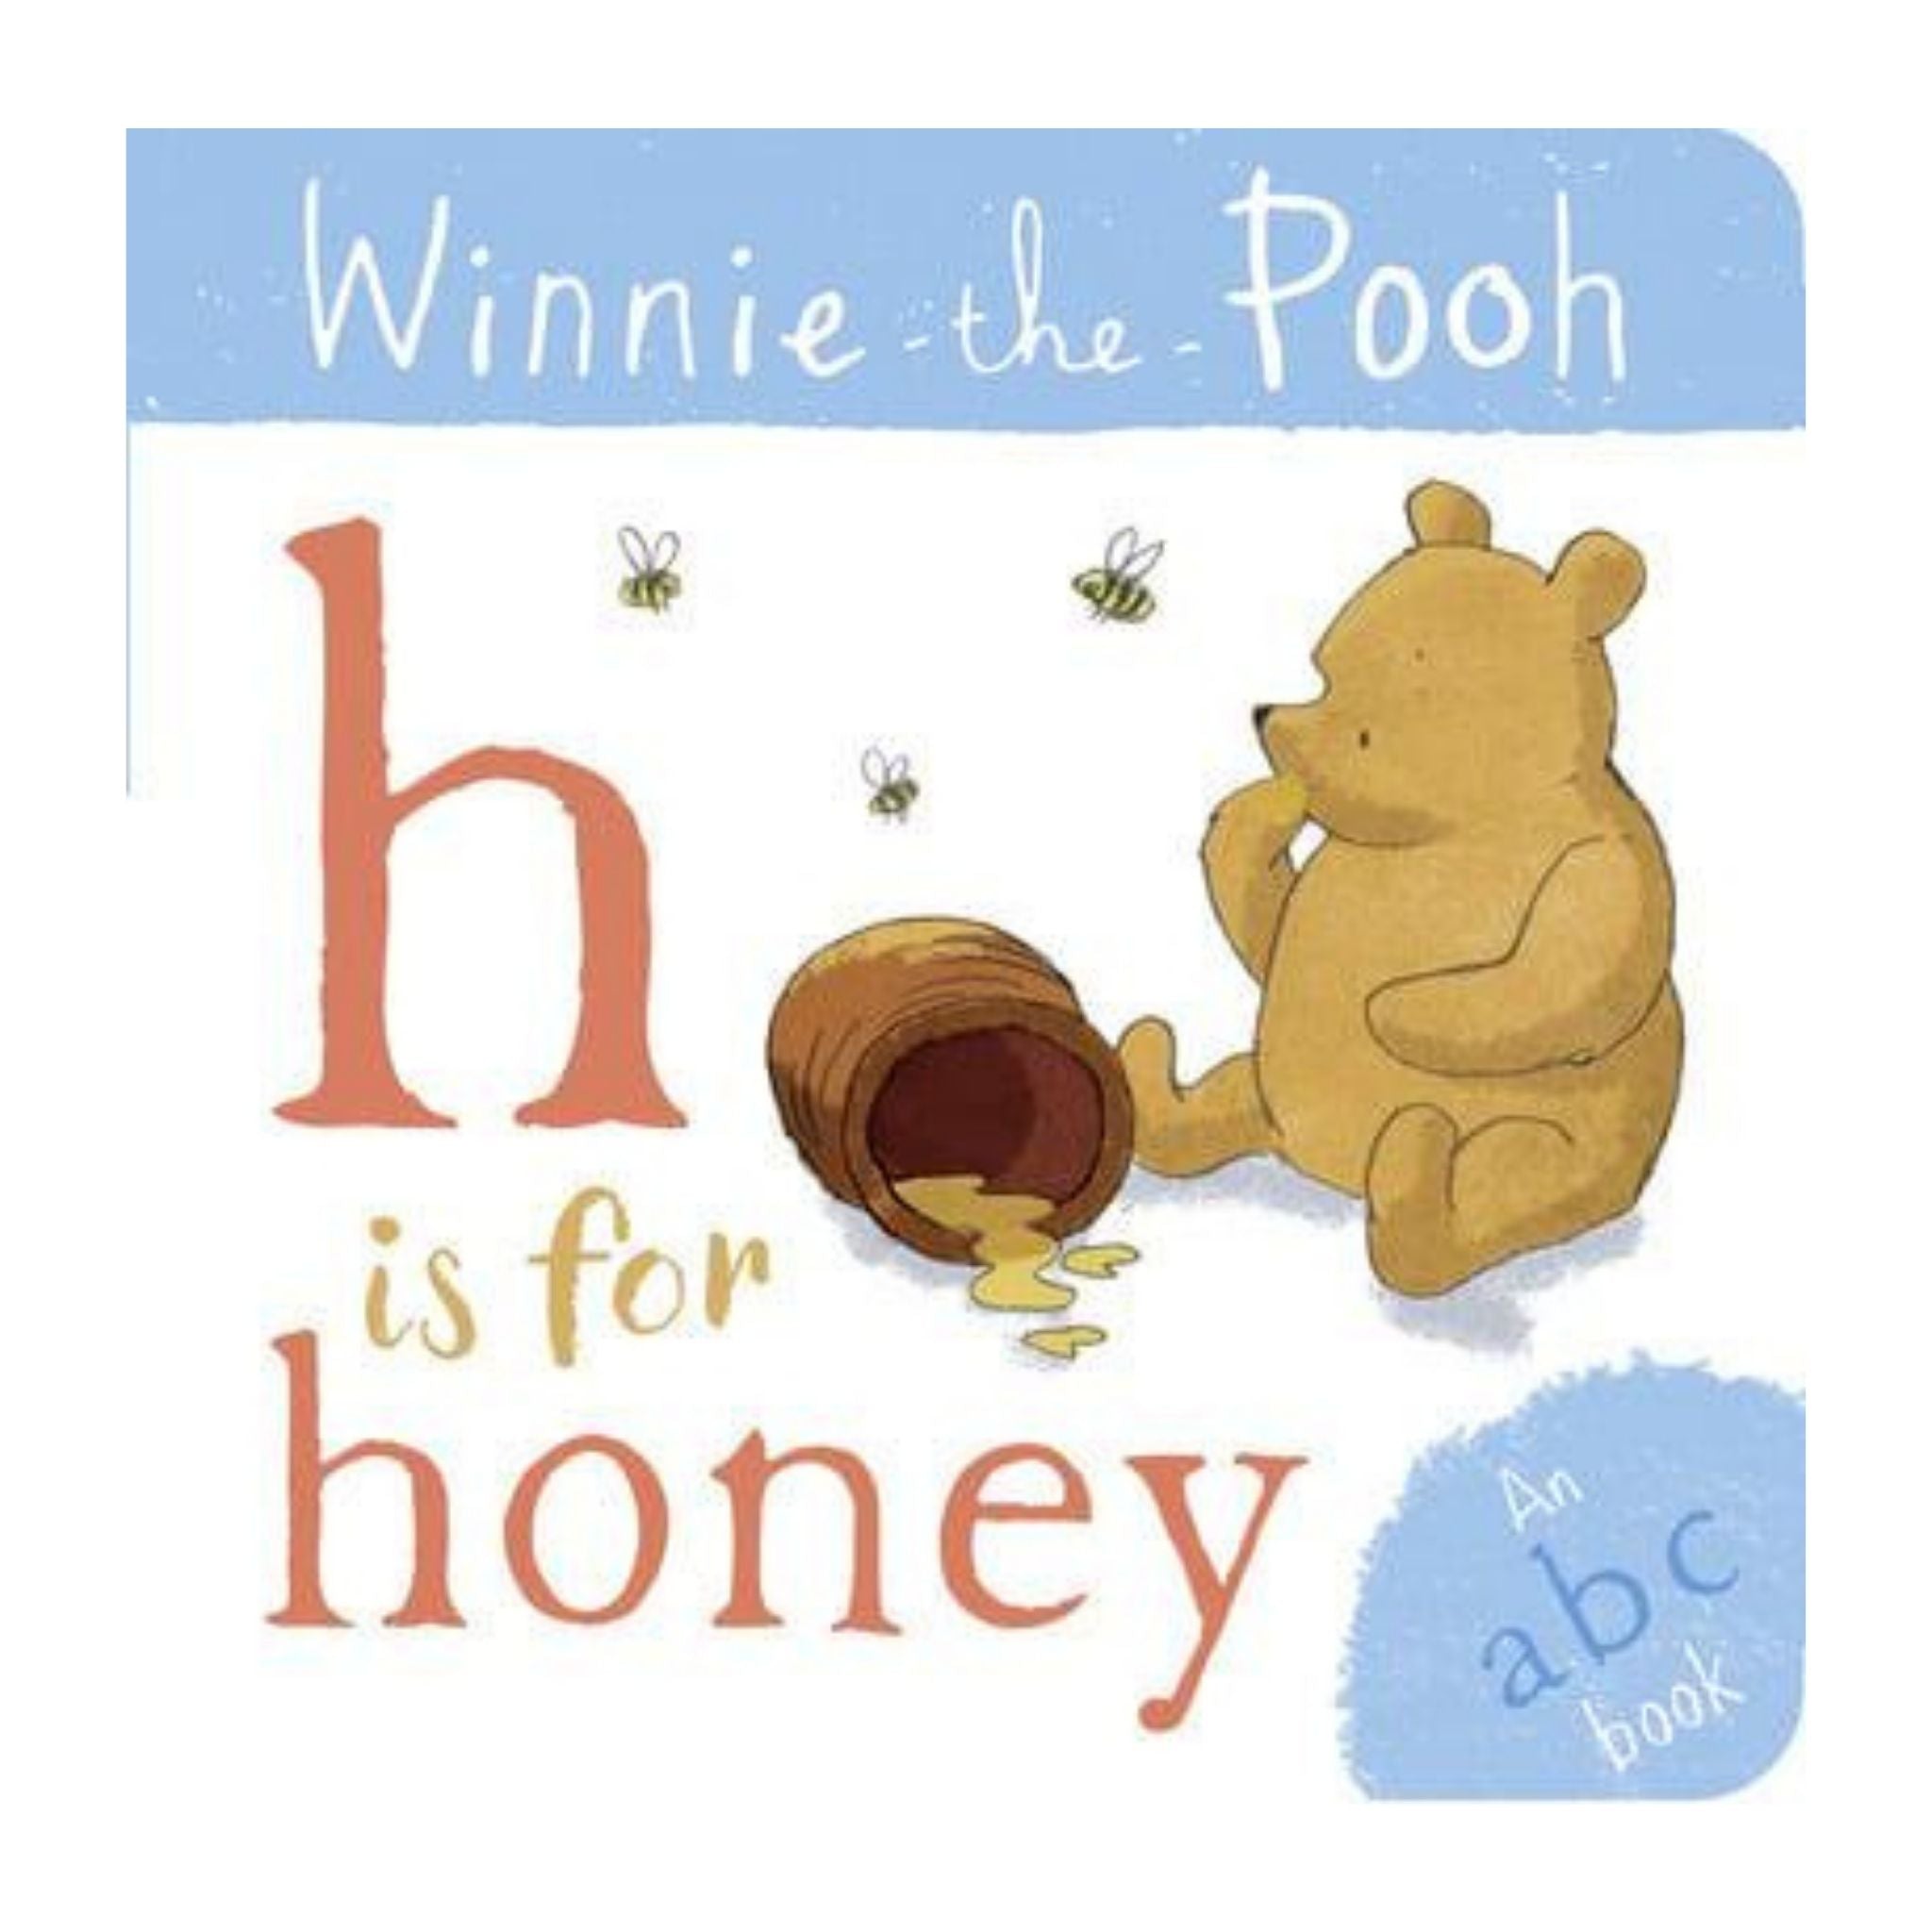 H Is for Honey An ABC Book - Winnie-the-Pooh